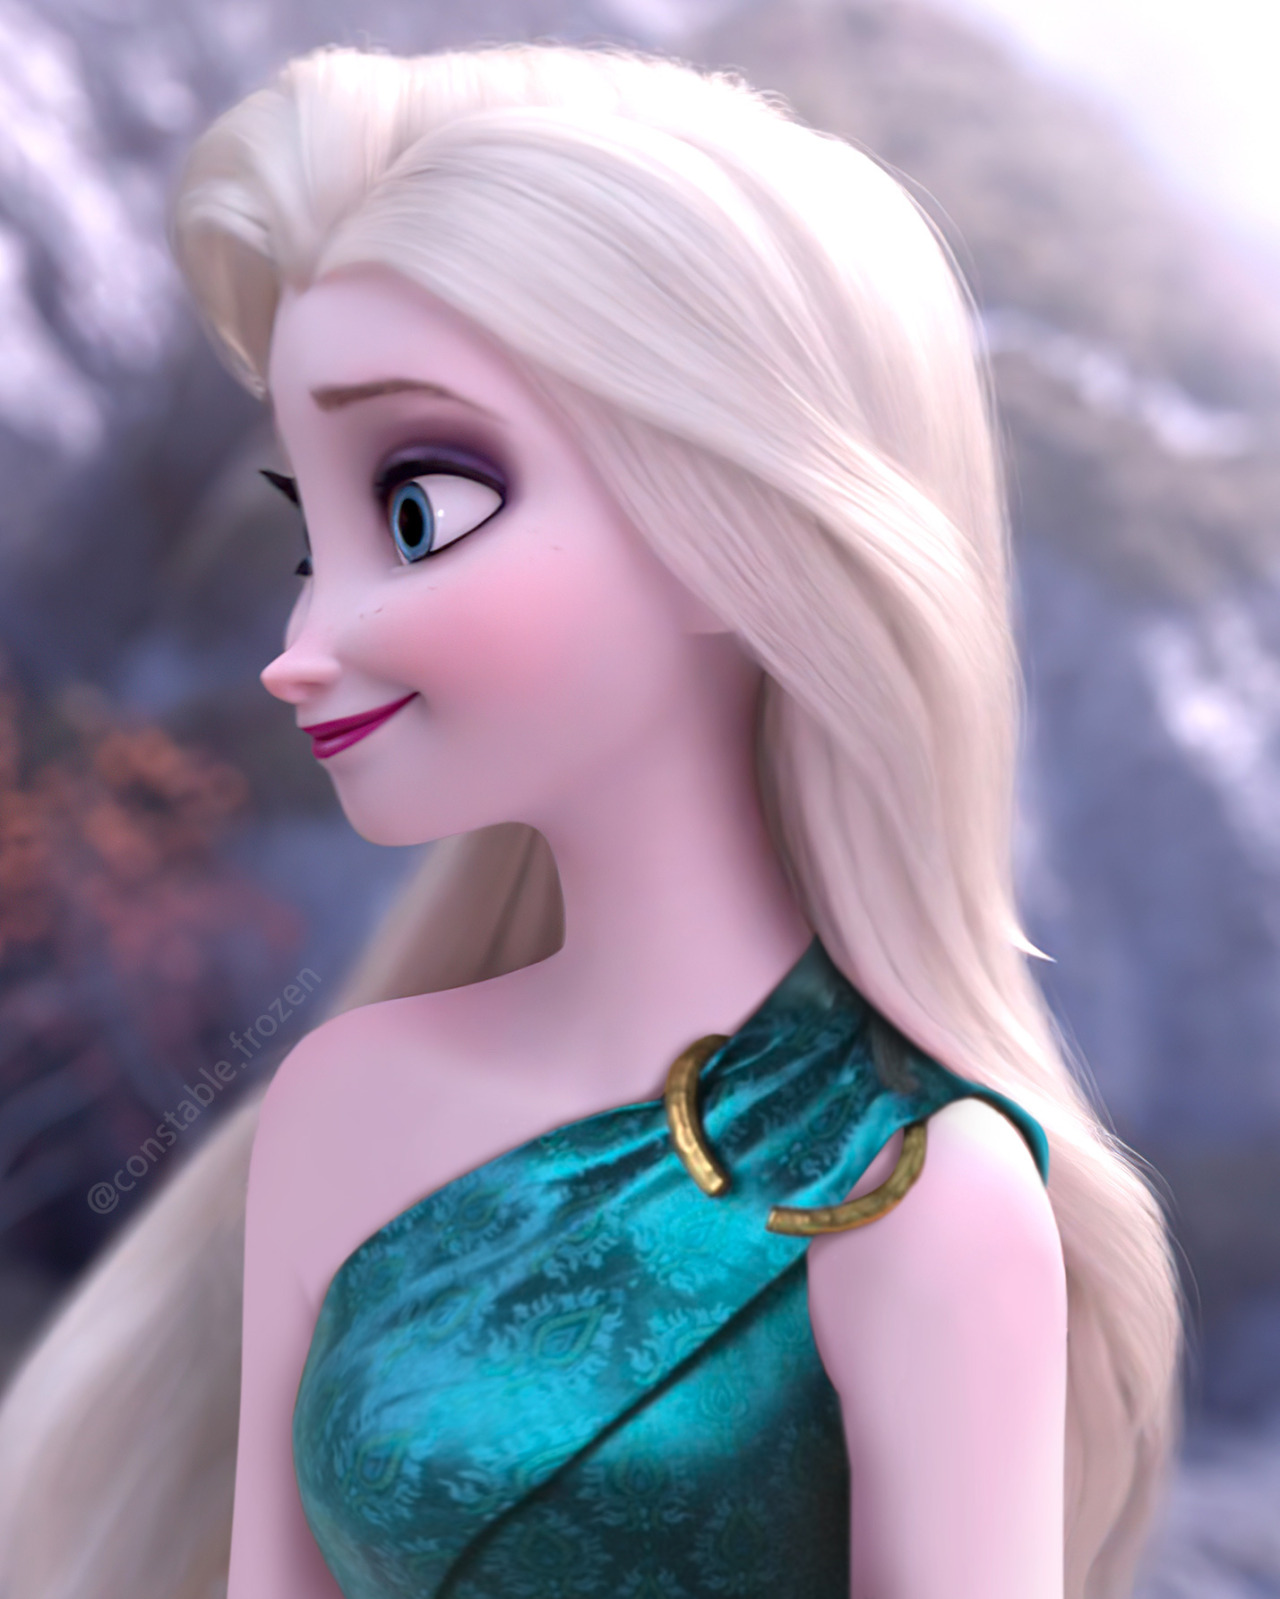 Elsa in some fantasy outfits - photoshop 